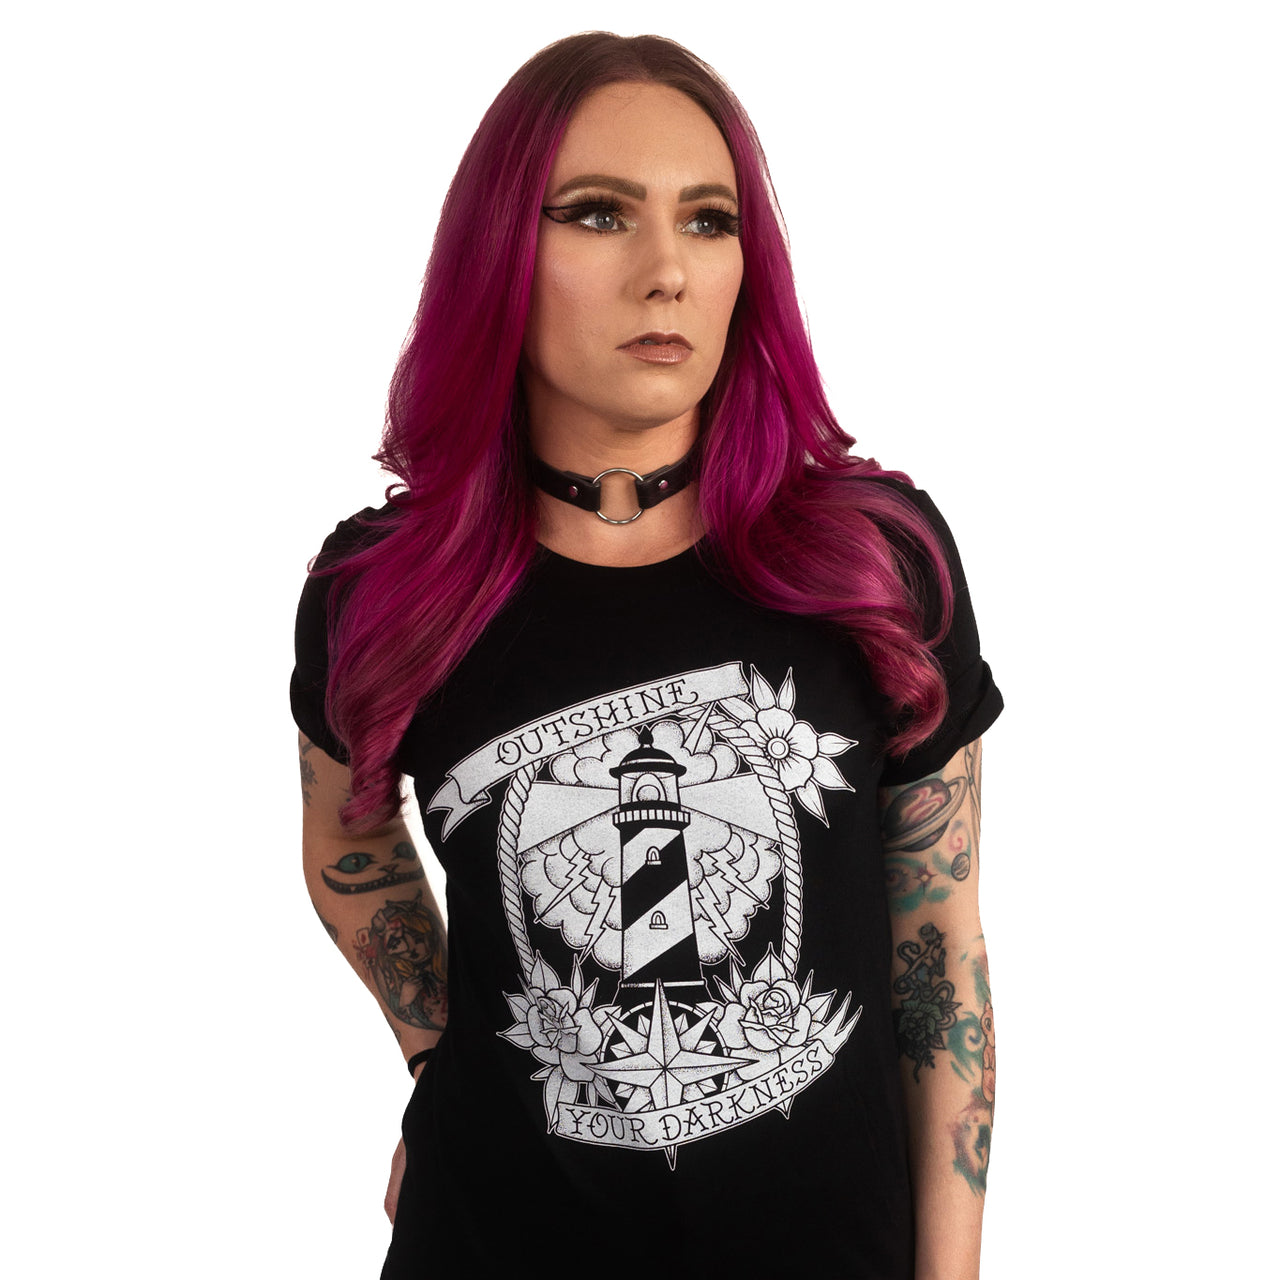 Outshine Your Darkness Tee